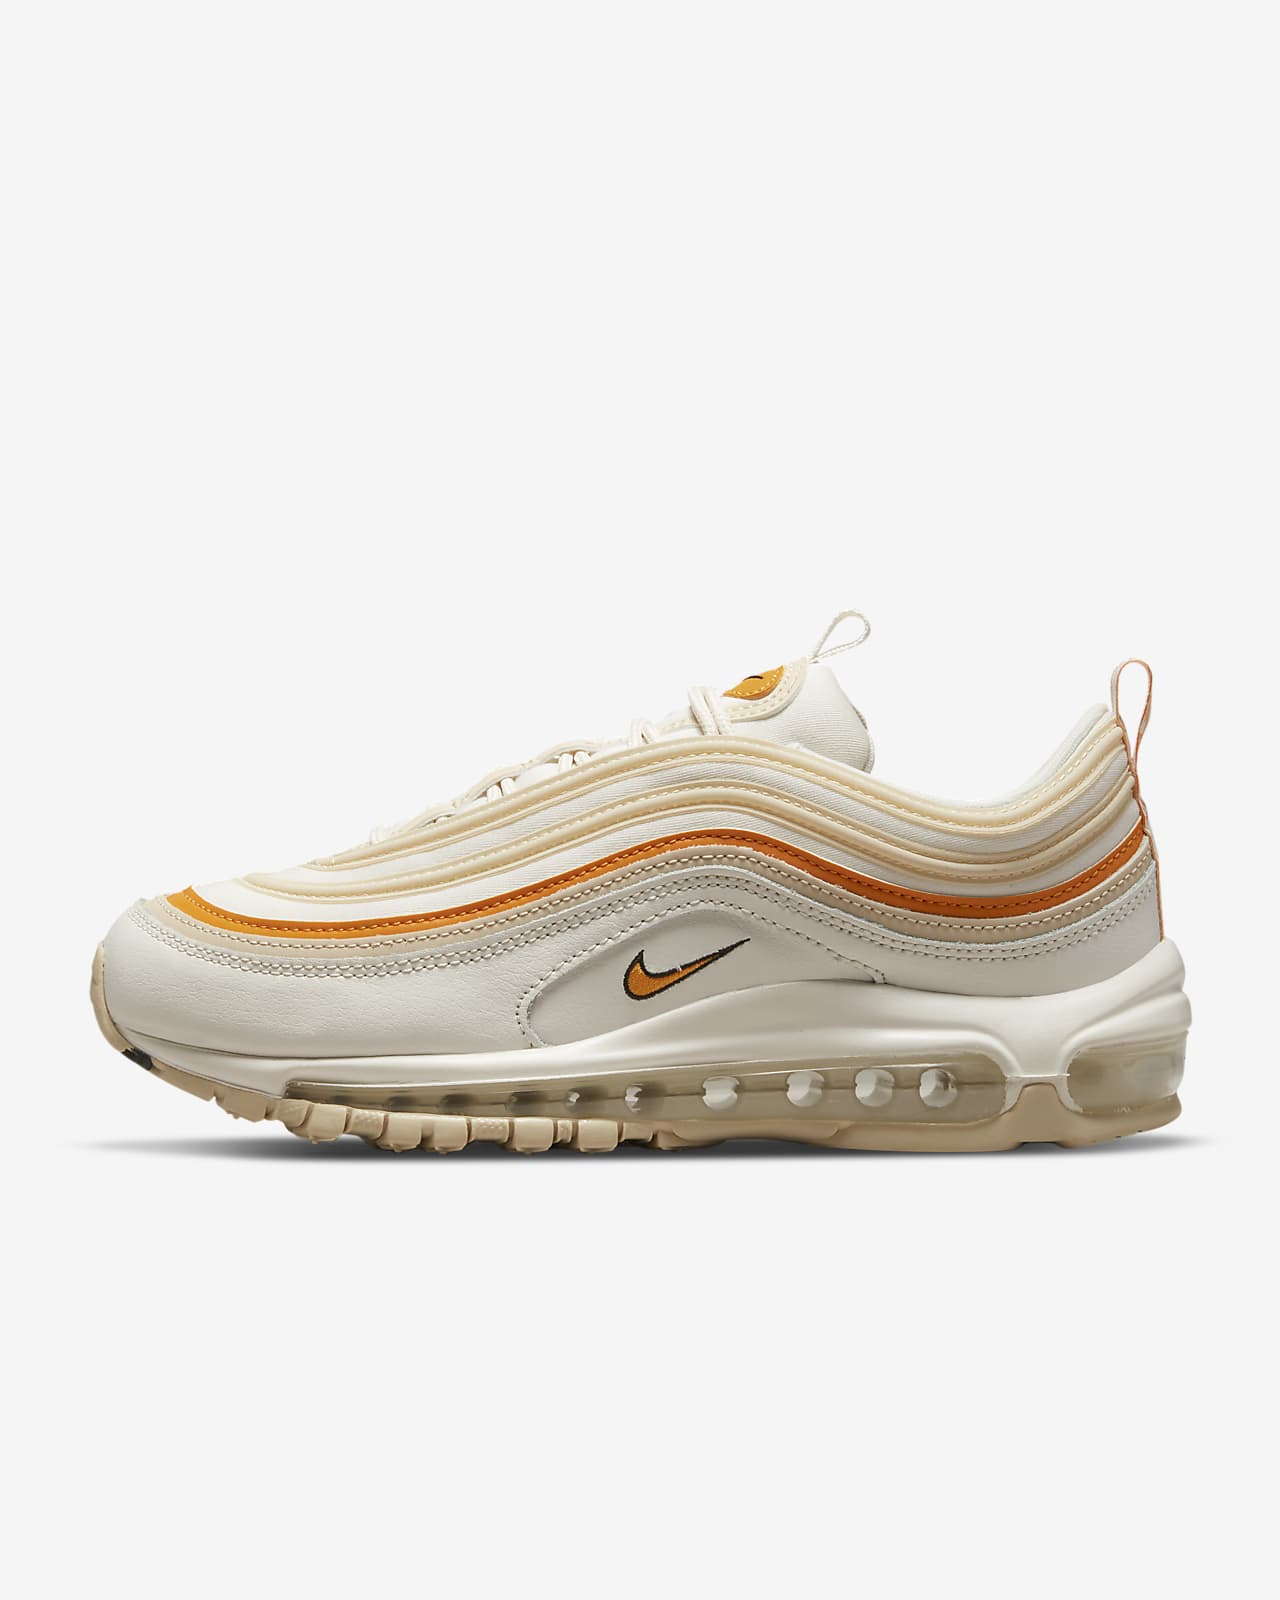 Nike Air Max 97 Women's Shoes جزمة تمبرلاند